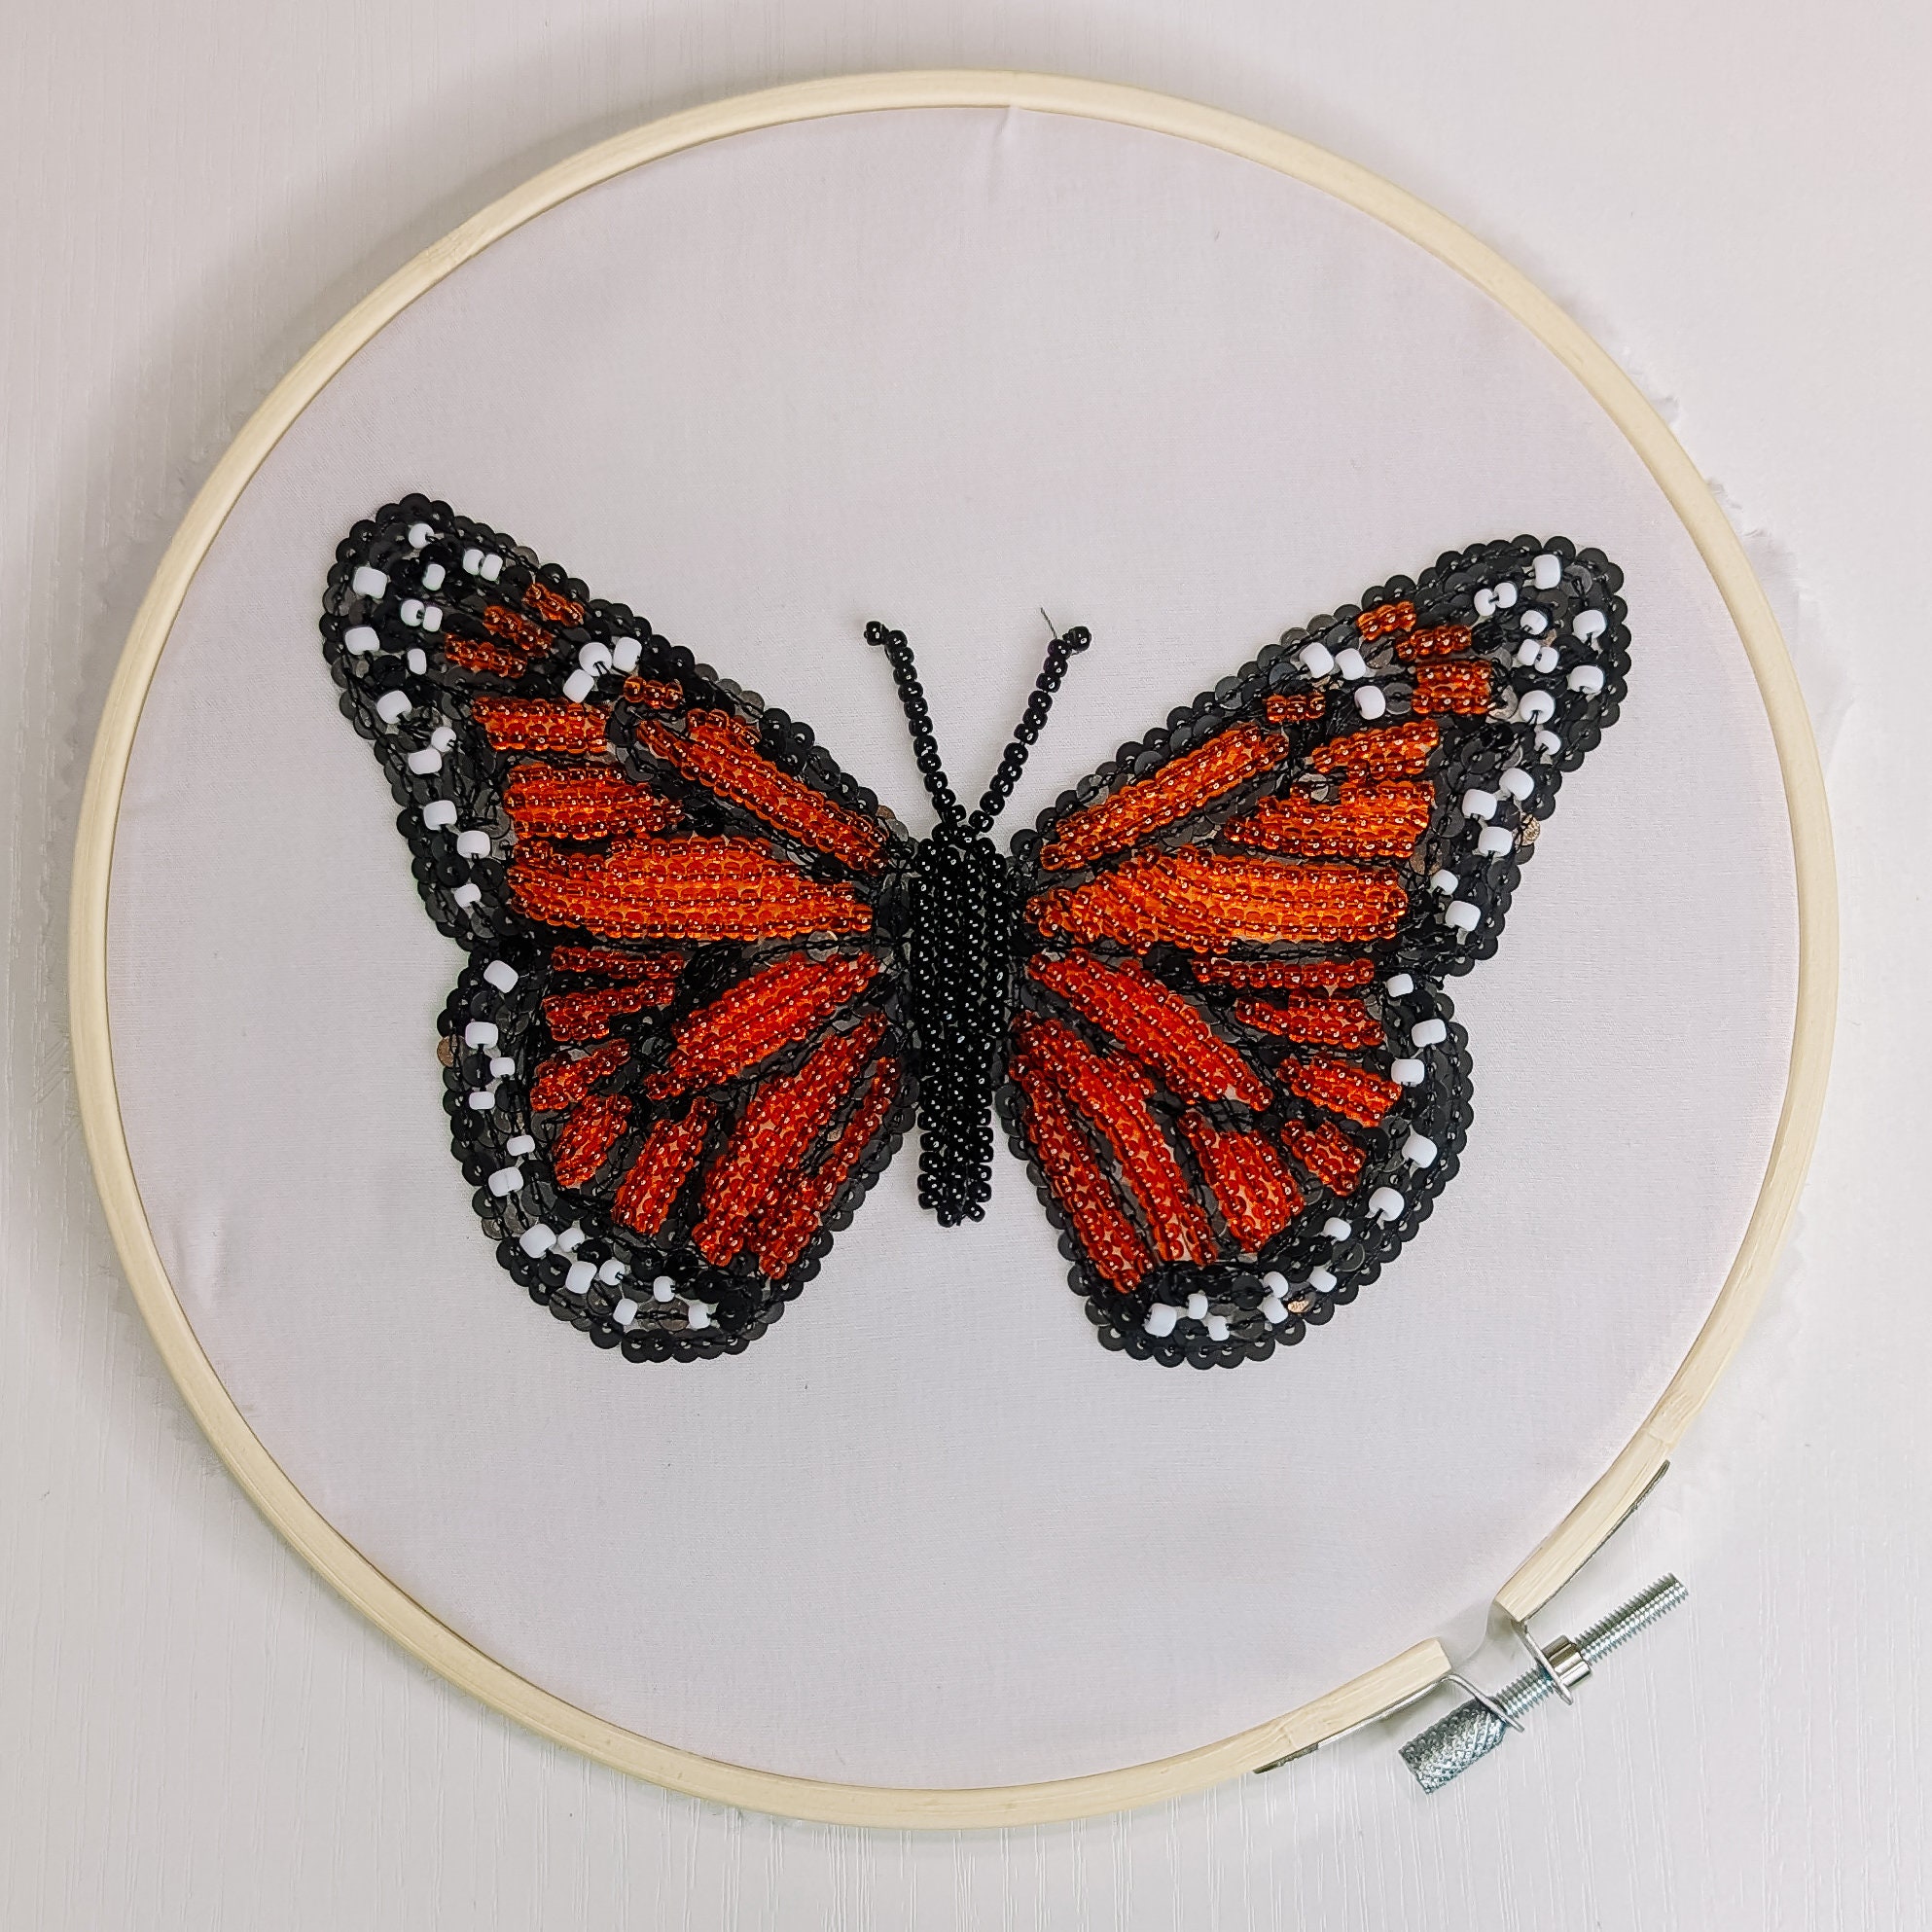 Tambour Embroidery Kit Moth for Beginner DIY Luneville Embroidery